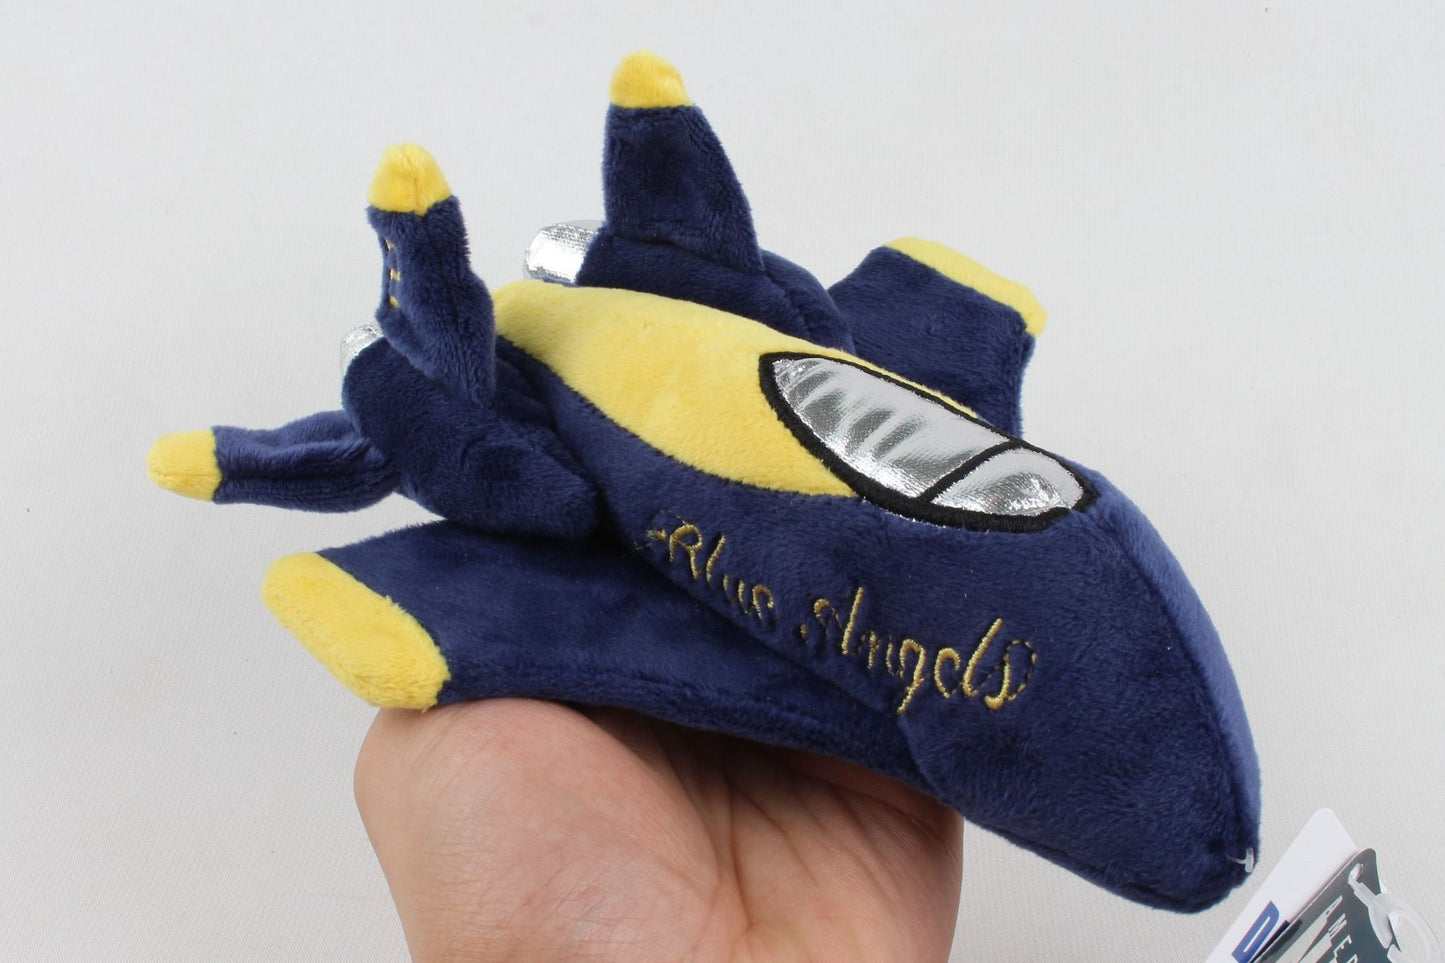 Blue Angels Airplane Plush By Daron